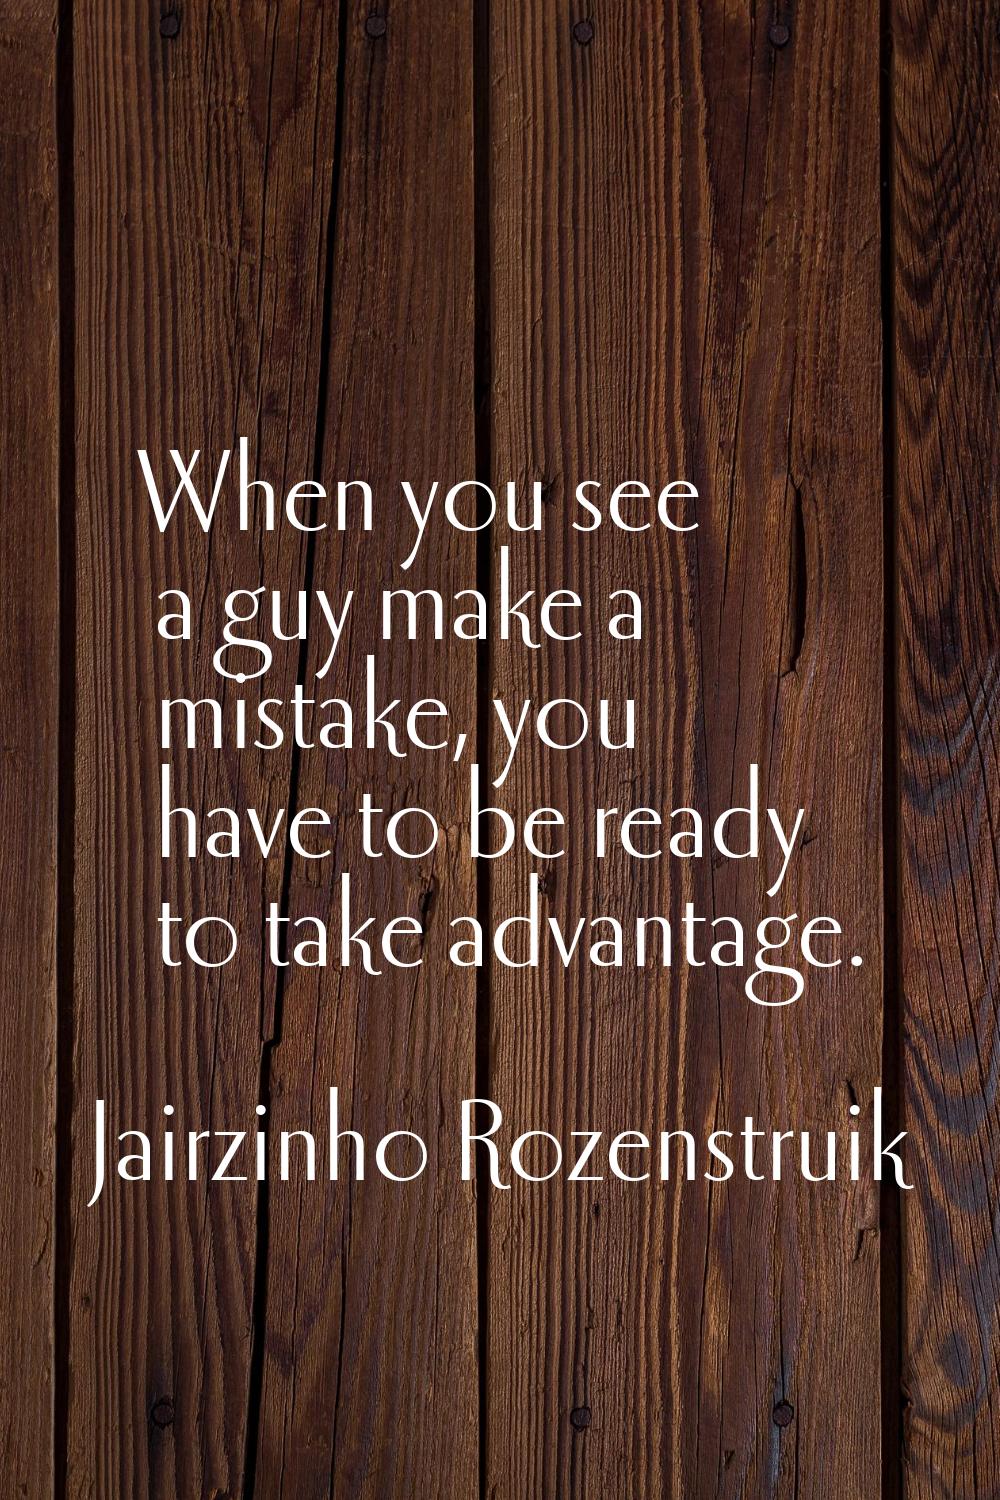 When you see a guy make a mistake, you have to be ready to take advantage.